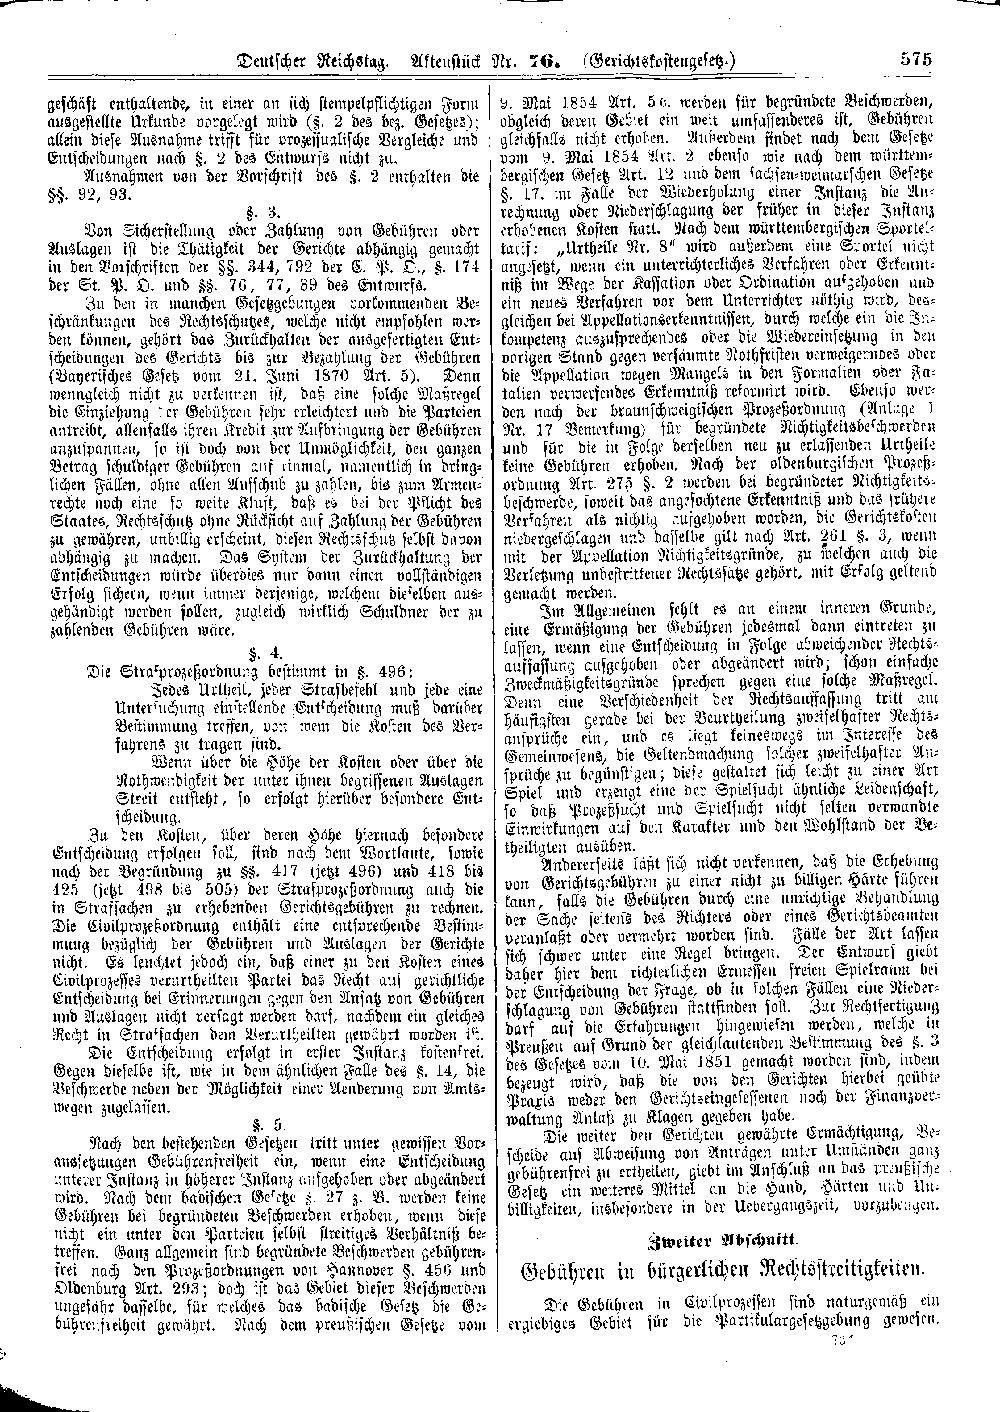 Scan of page 575